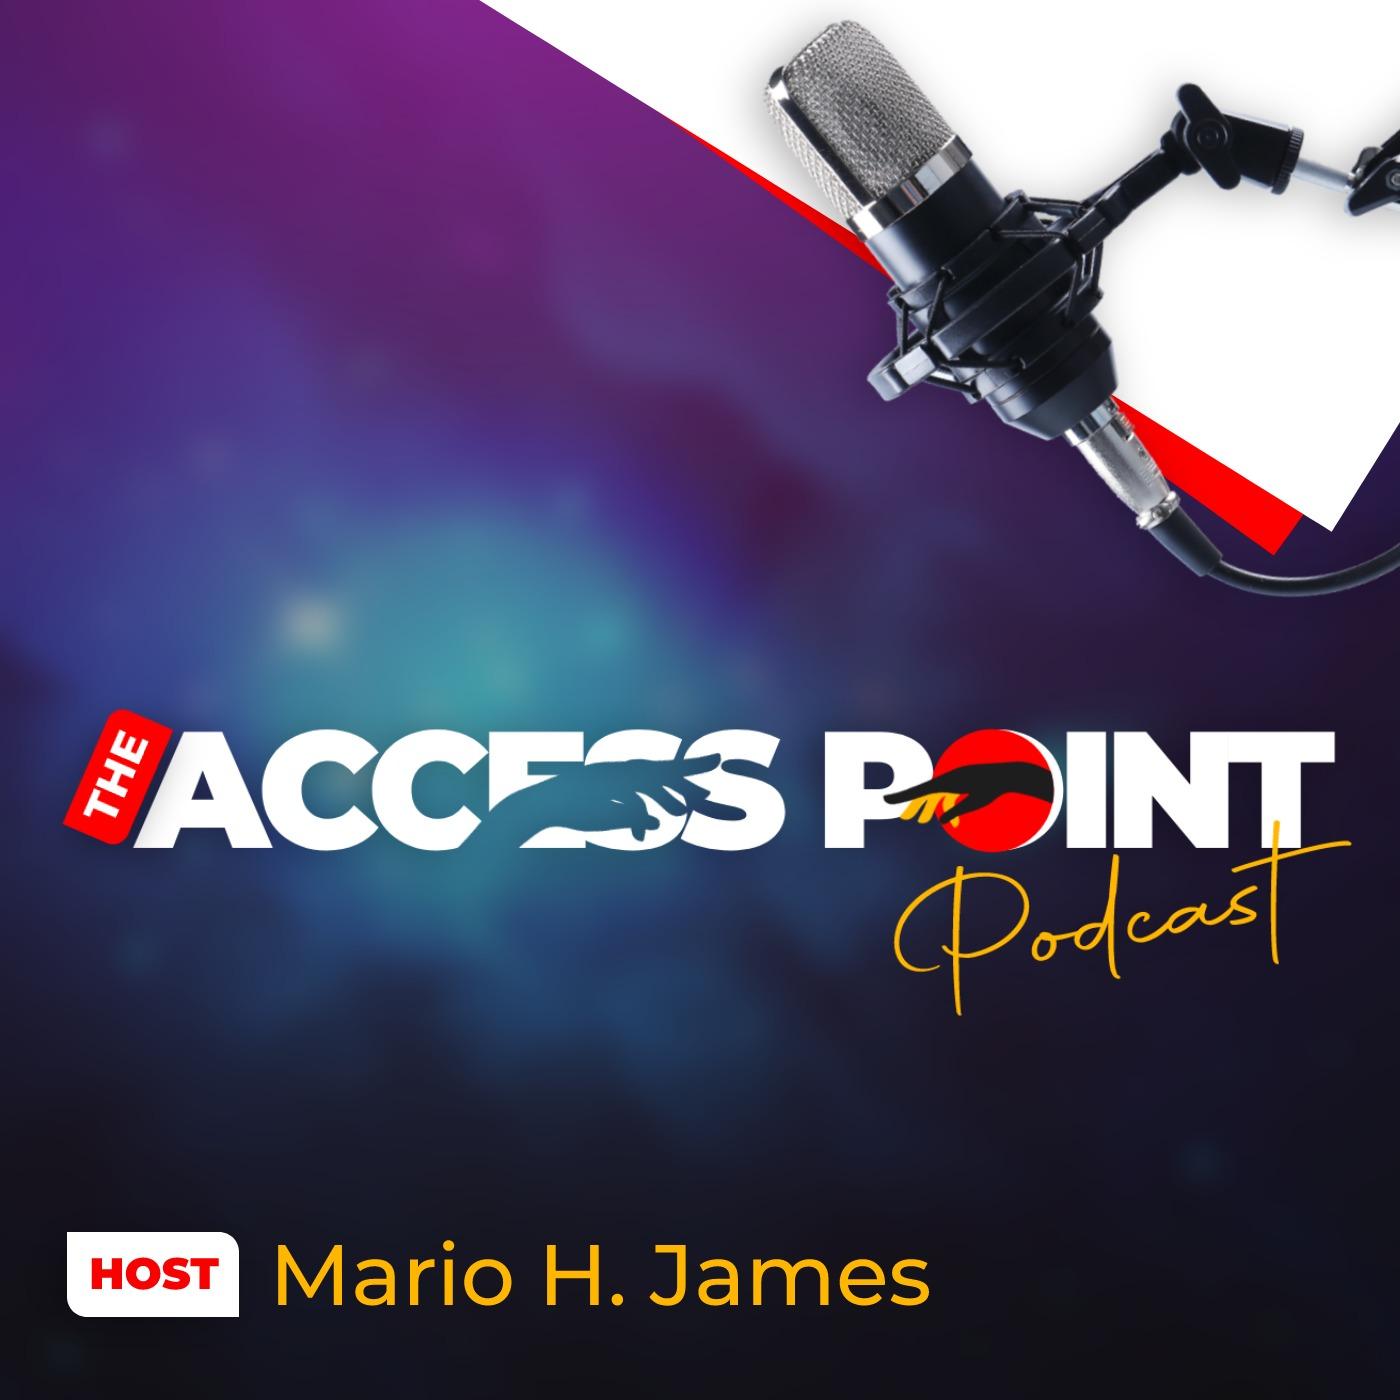 The Access Point Podcast